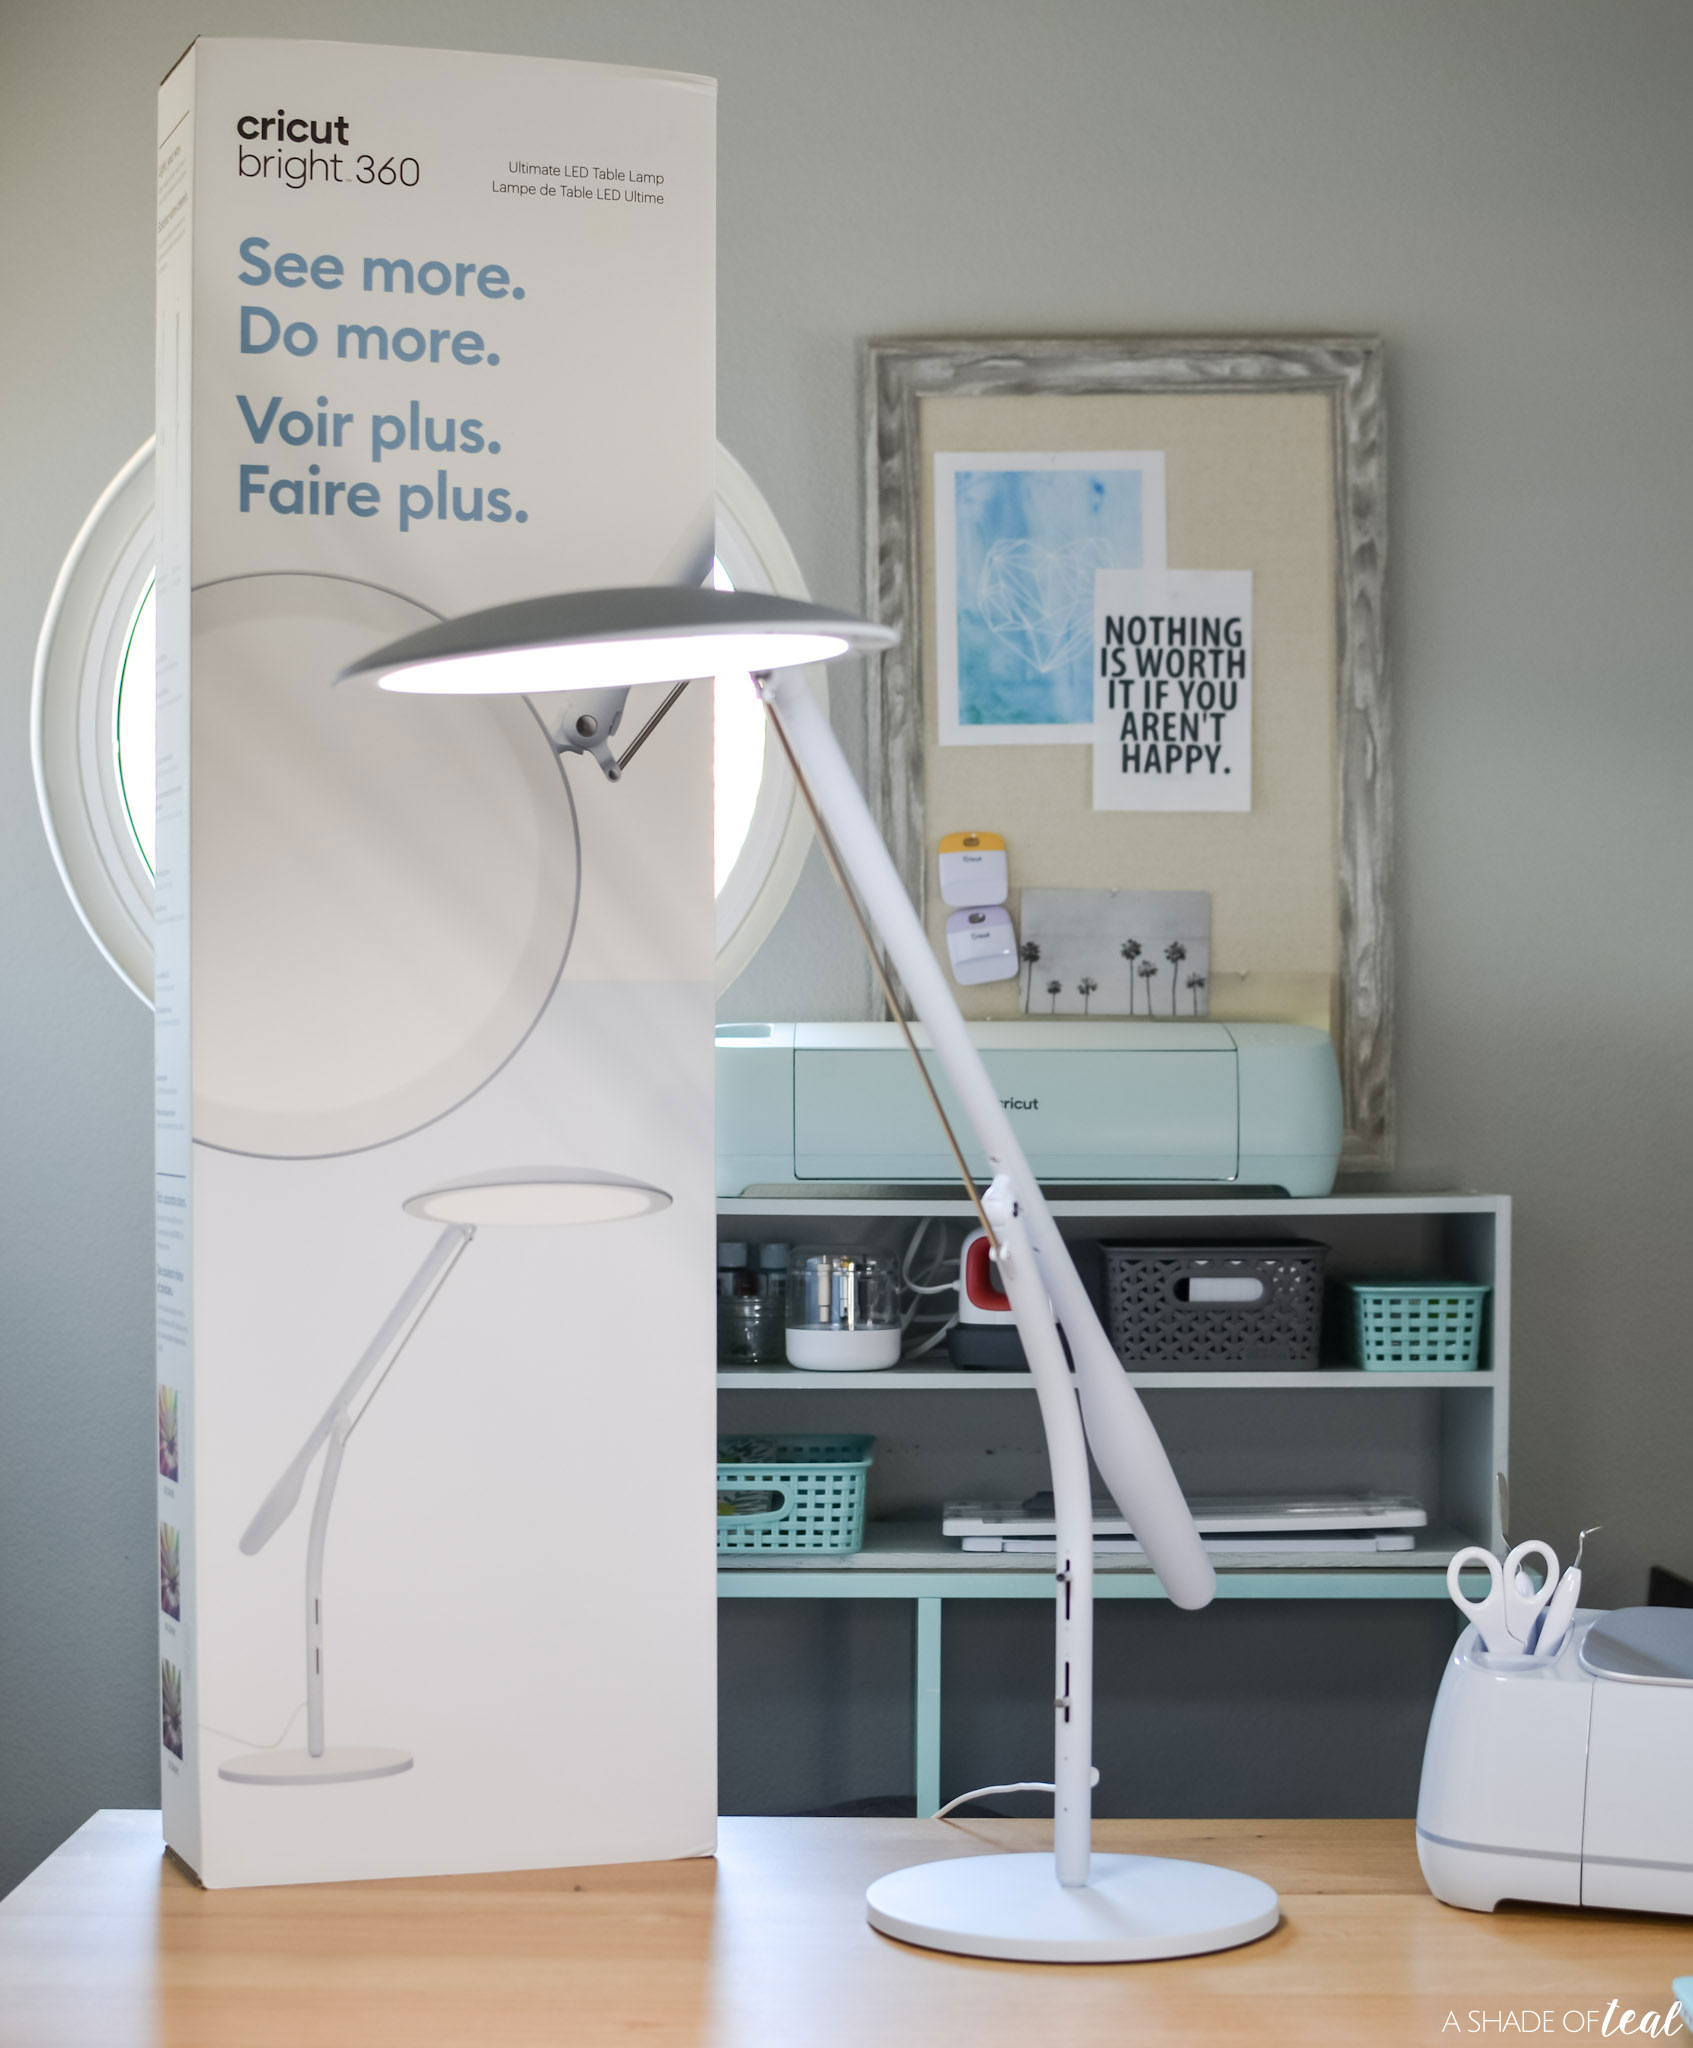 Getting to Know the Cricut Bright 360 Lamp - Hey, Let's Make Stuff